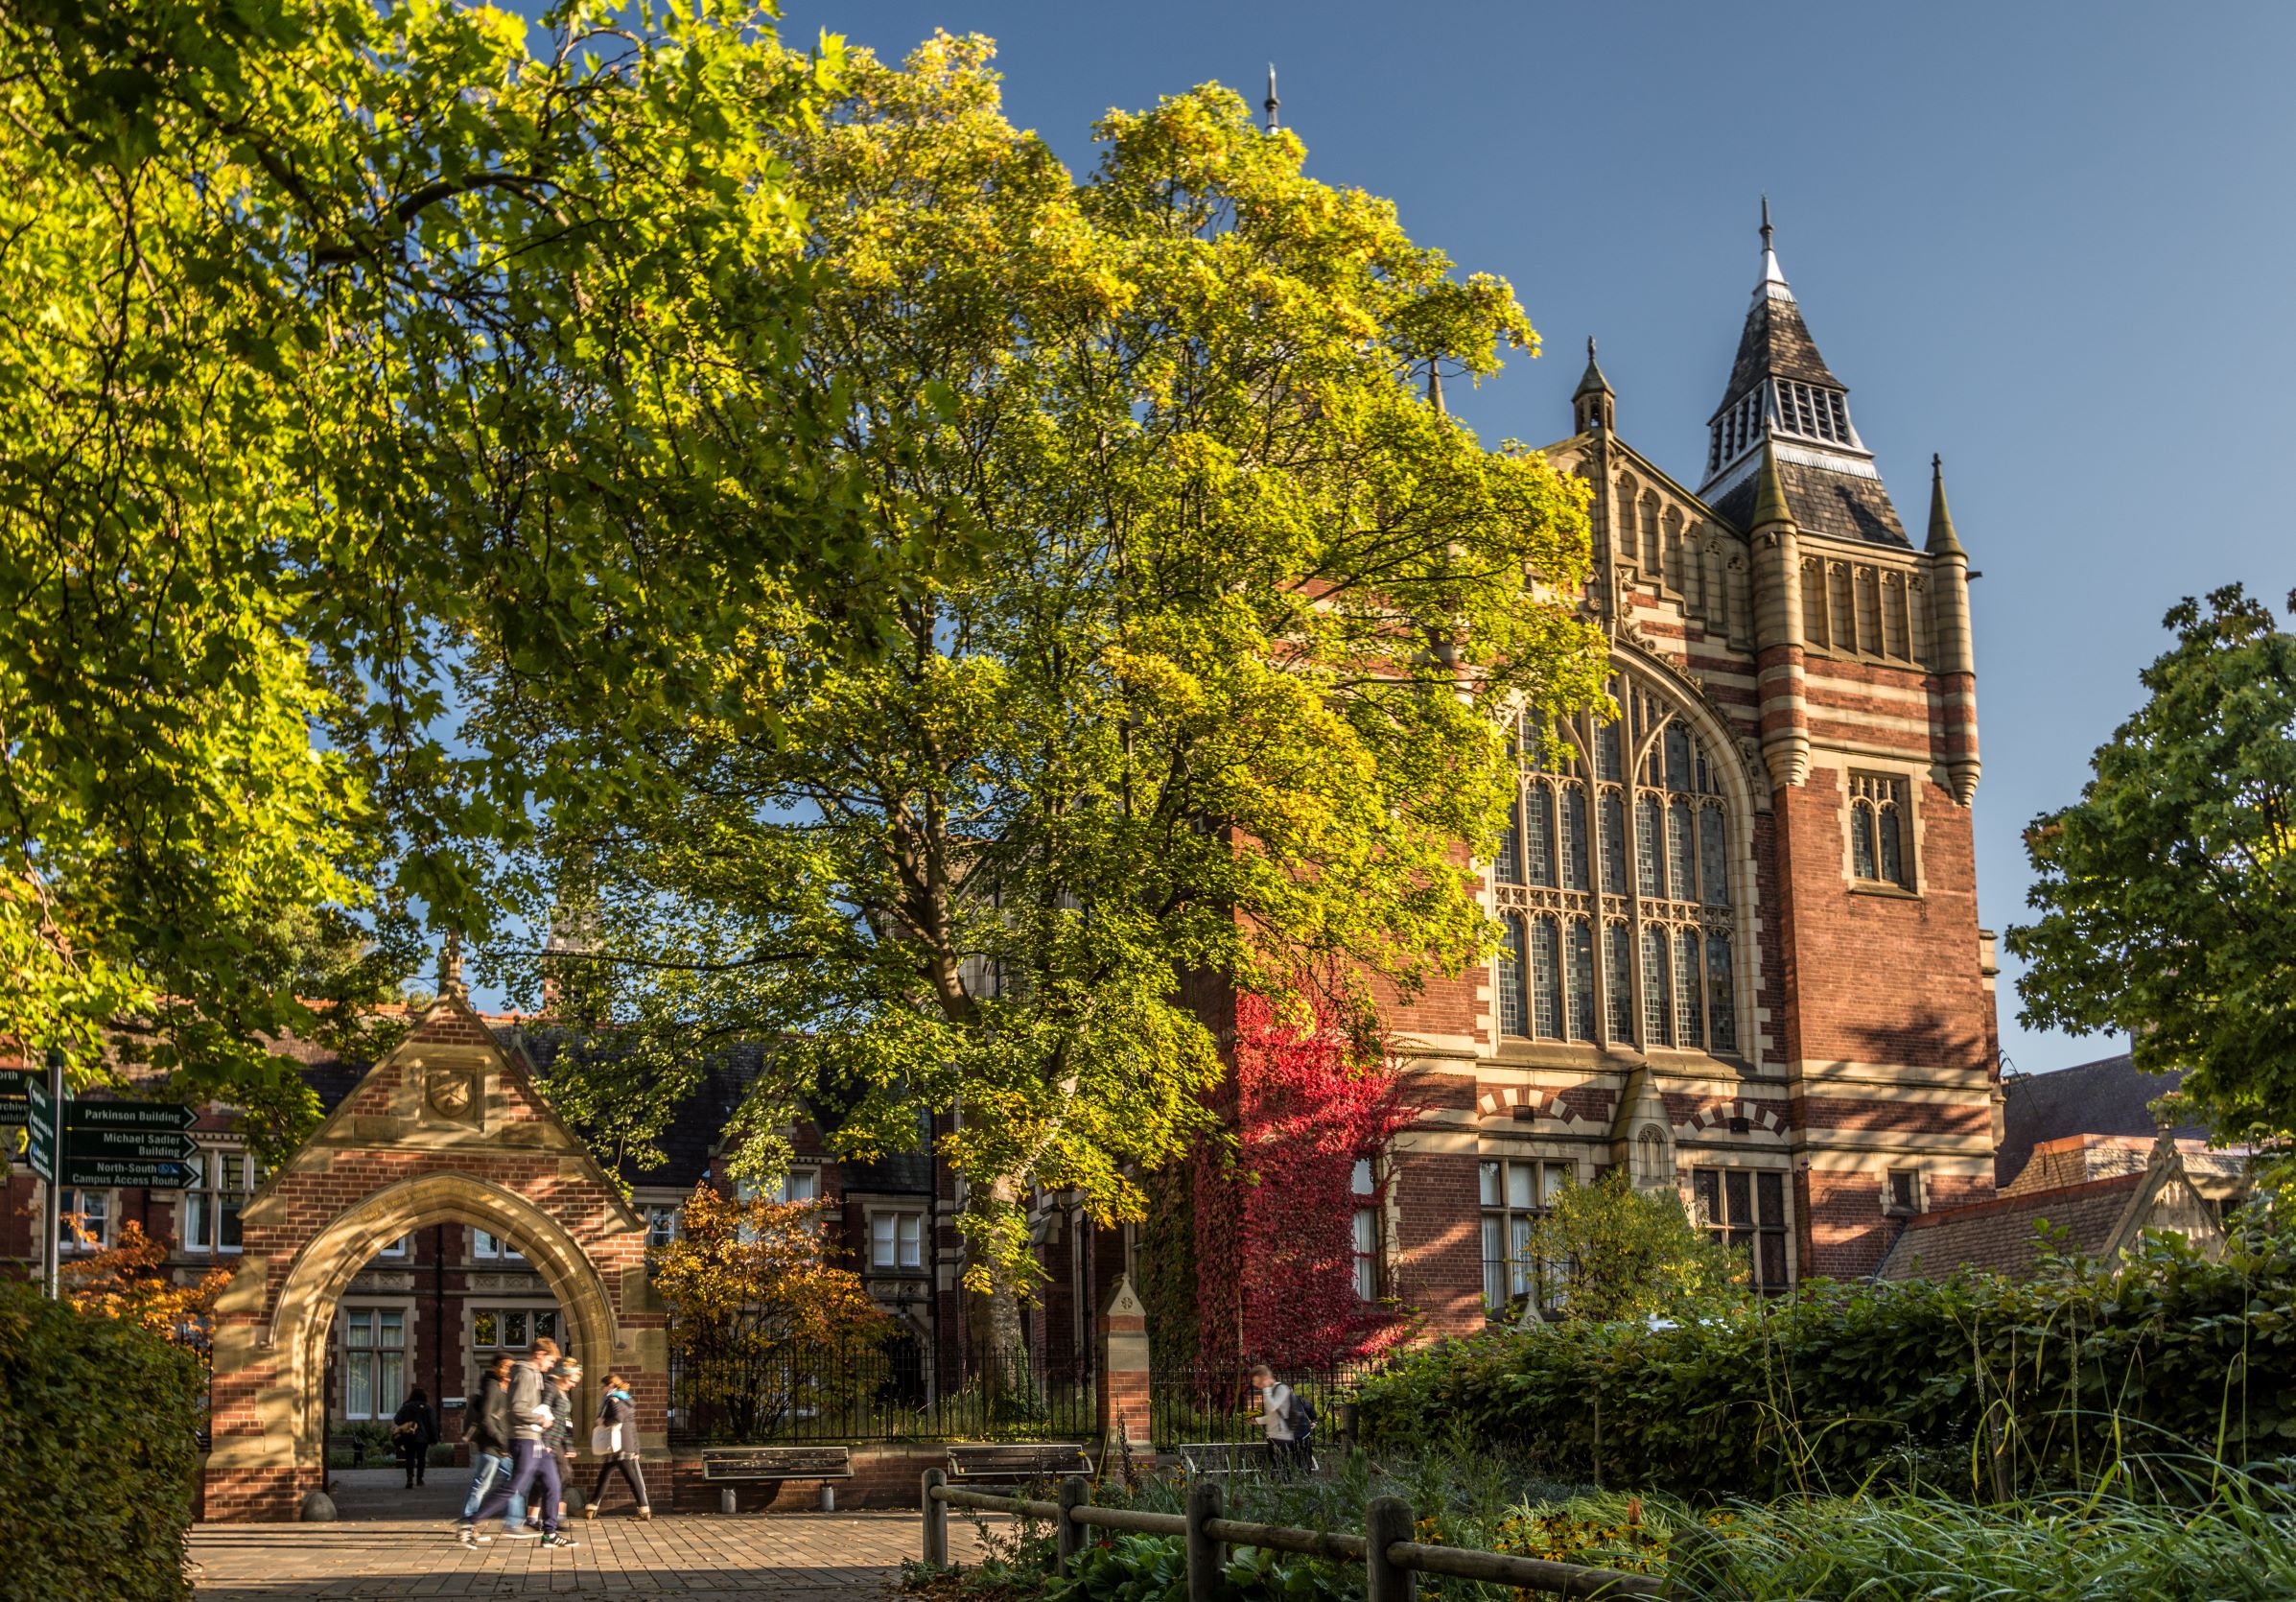 Decorative photograph of University Great Hall with green tree in foreground.